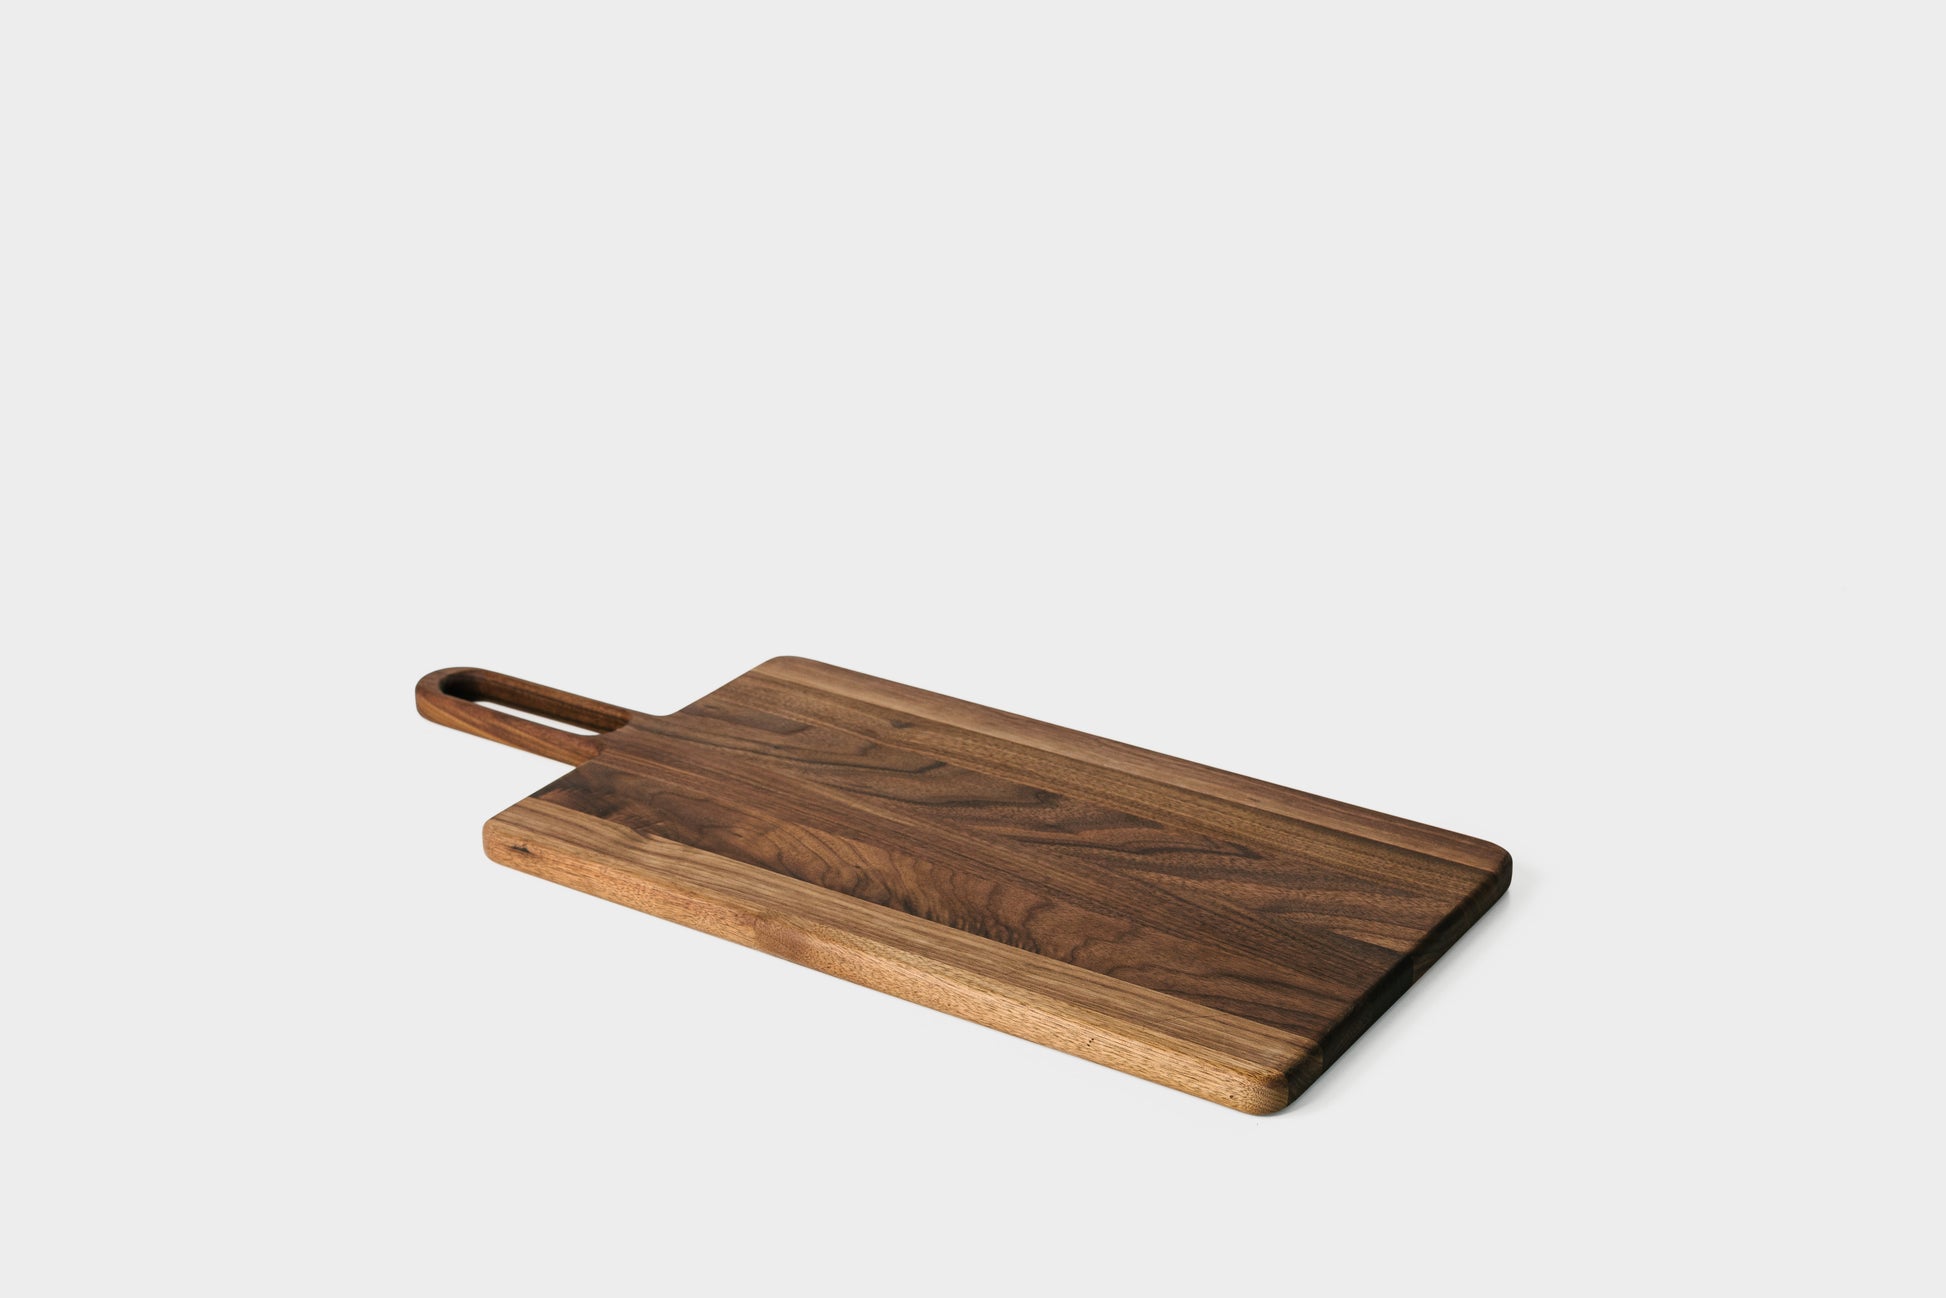 Walnut Bread Board. Large in size, could be a great charcuterie board as well.